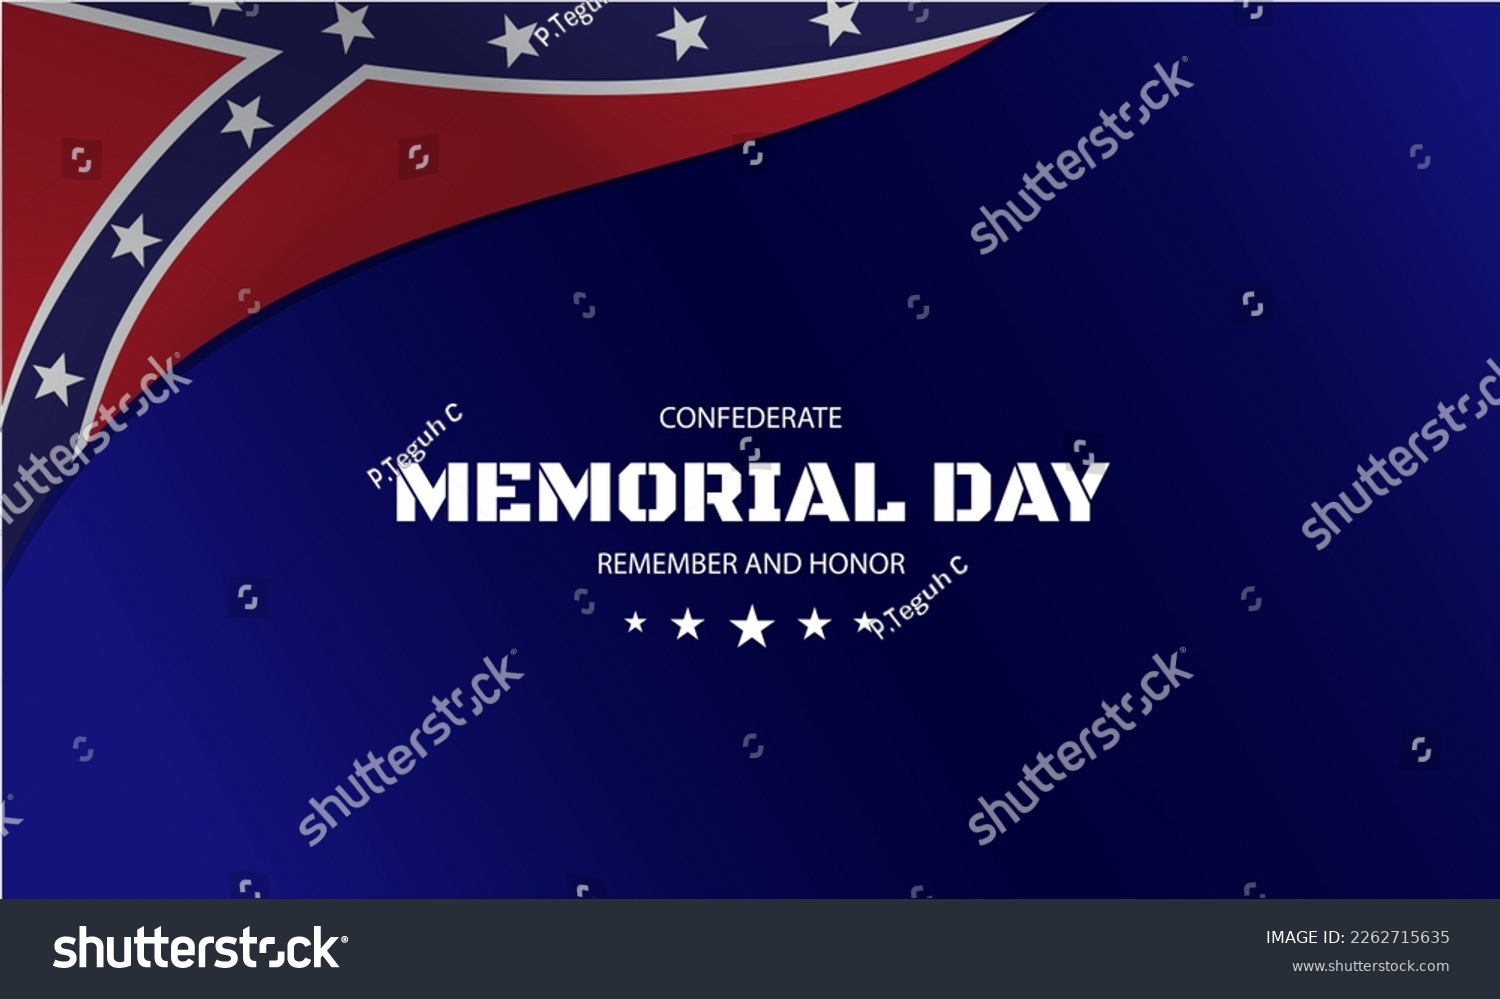 SVG of Confederate Memorial Day background design vector illustration. Suitable to use on Confederate Memorial Day event. svg